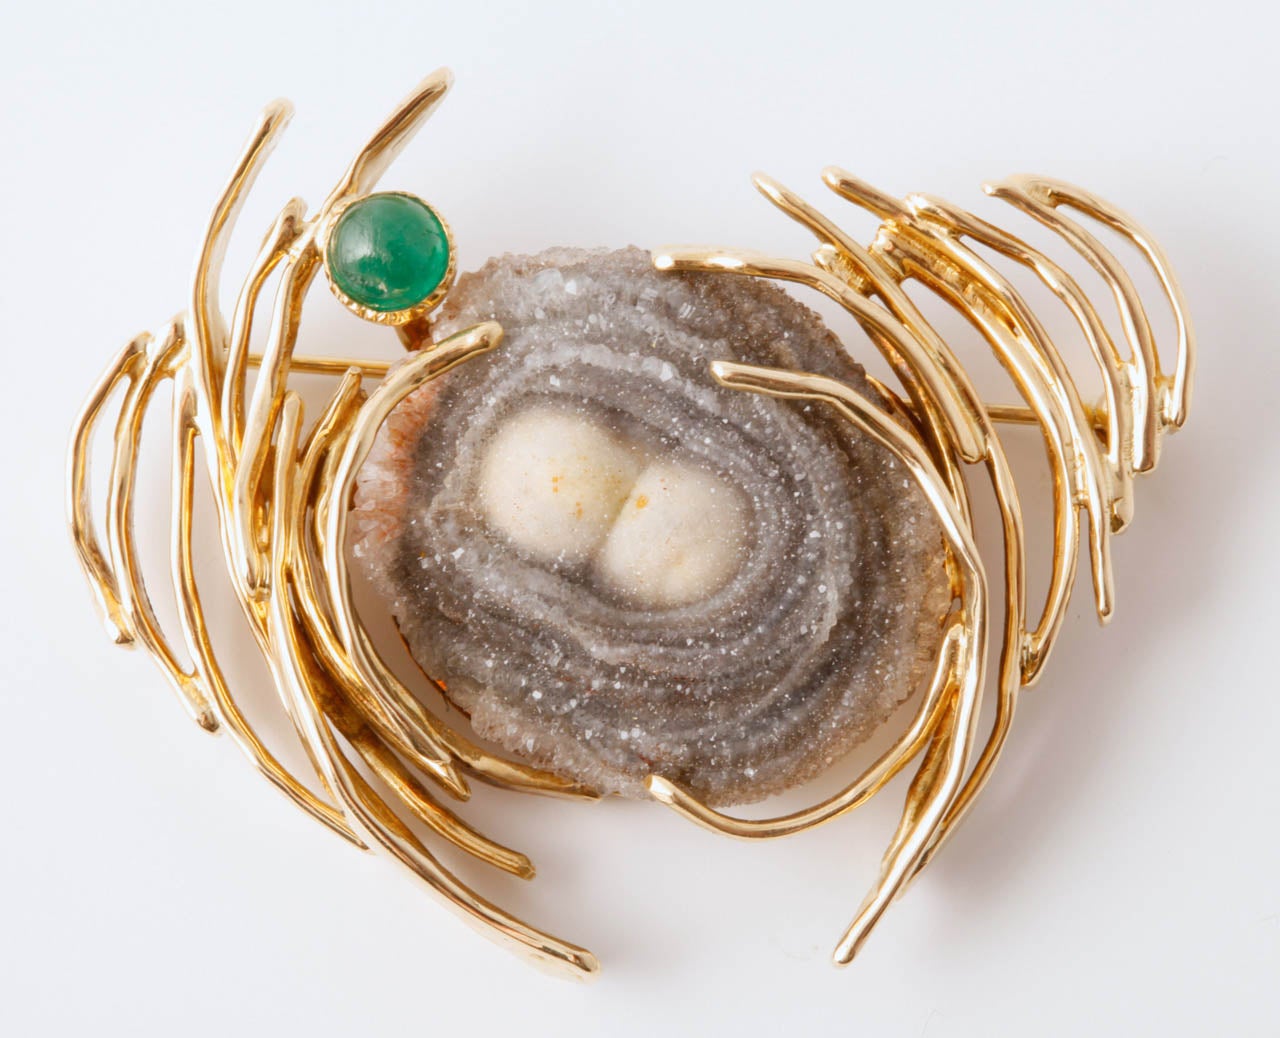 A gold, emerald and agate brooch by Anneke Schat. Designed as a free form centrally set with agate matrix, flanked by yellow gold curved bars and a cabochon emerald . Engraved Anneke Schat.

All of our prices exclude VAT.